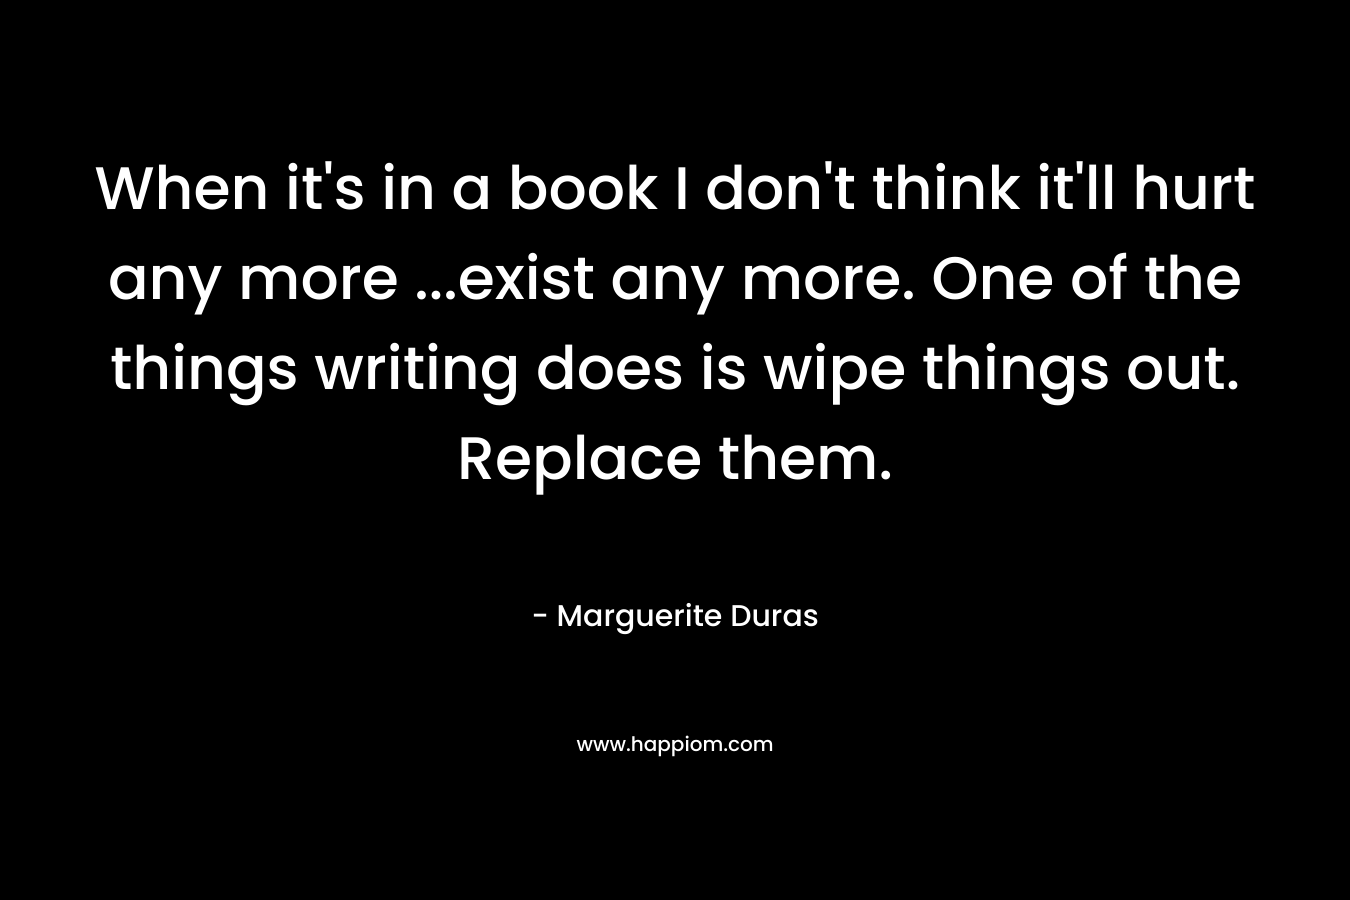 When it’s in a book I don’t think it’ll hurt any more …exist any more. One of the things writing does is wipe things out. Replace them. – Marguerite Duras